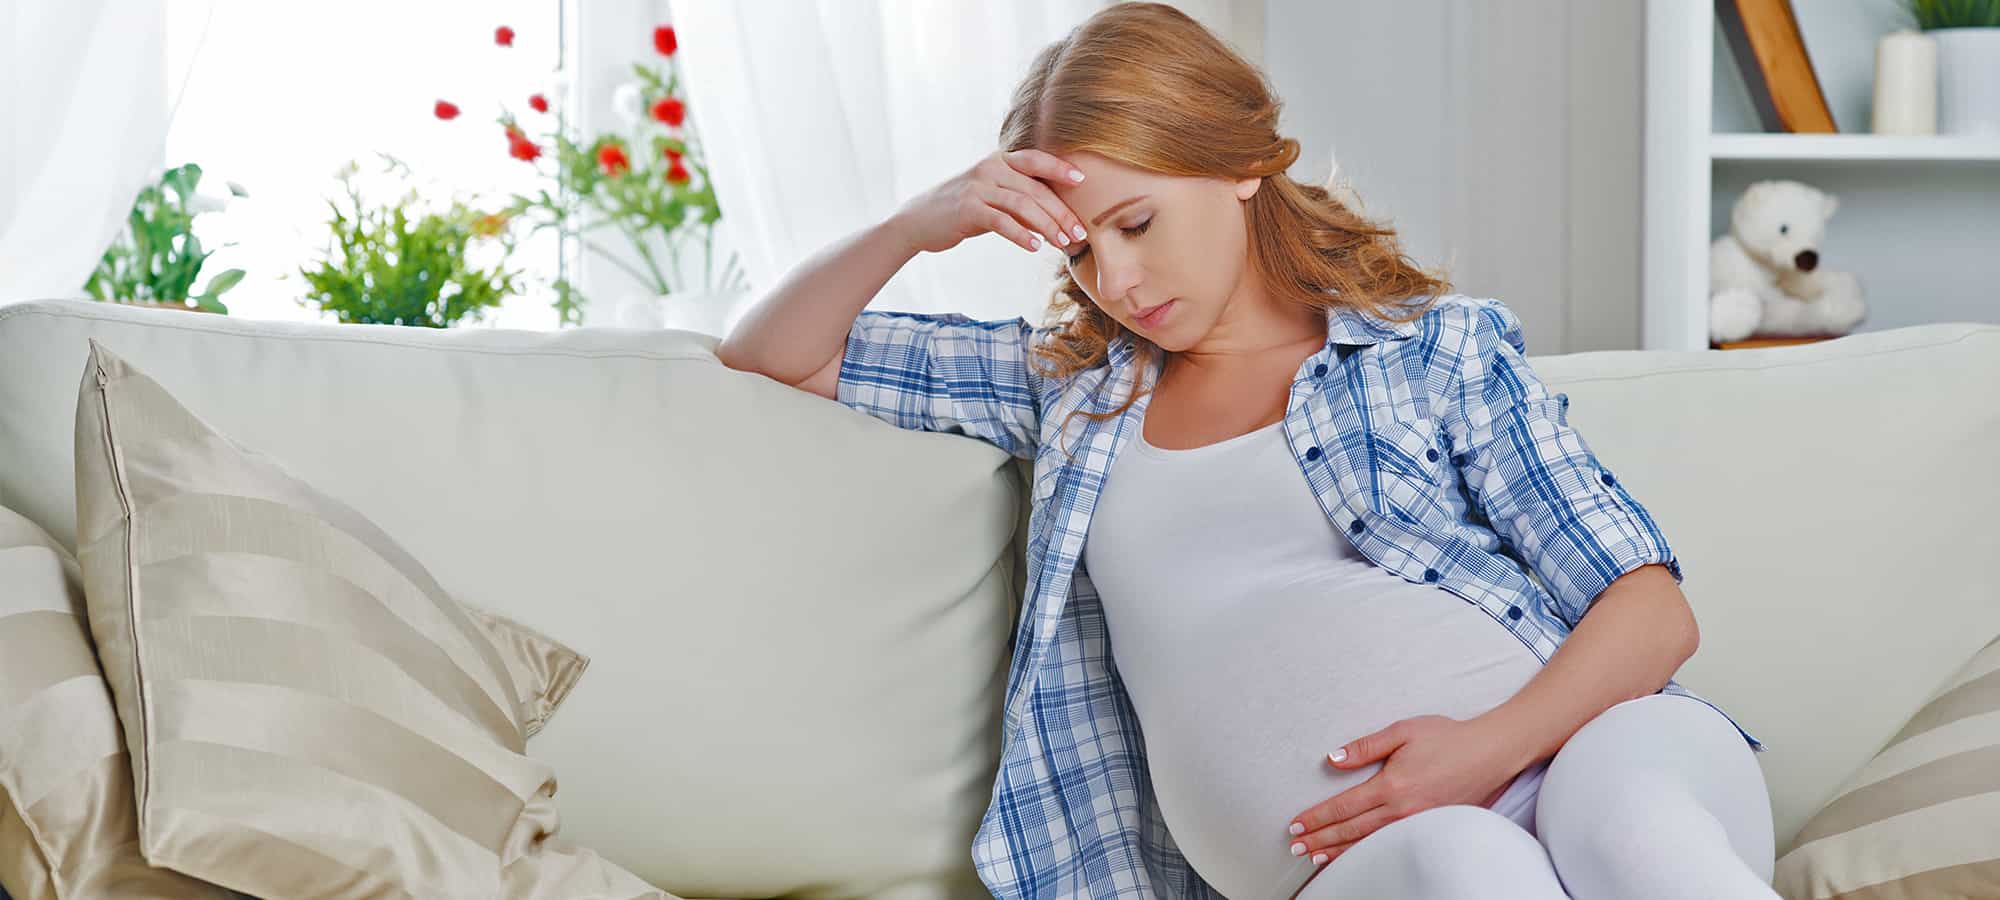 Common Pregnancy Ailments and How to Manage Them